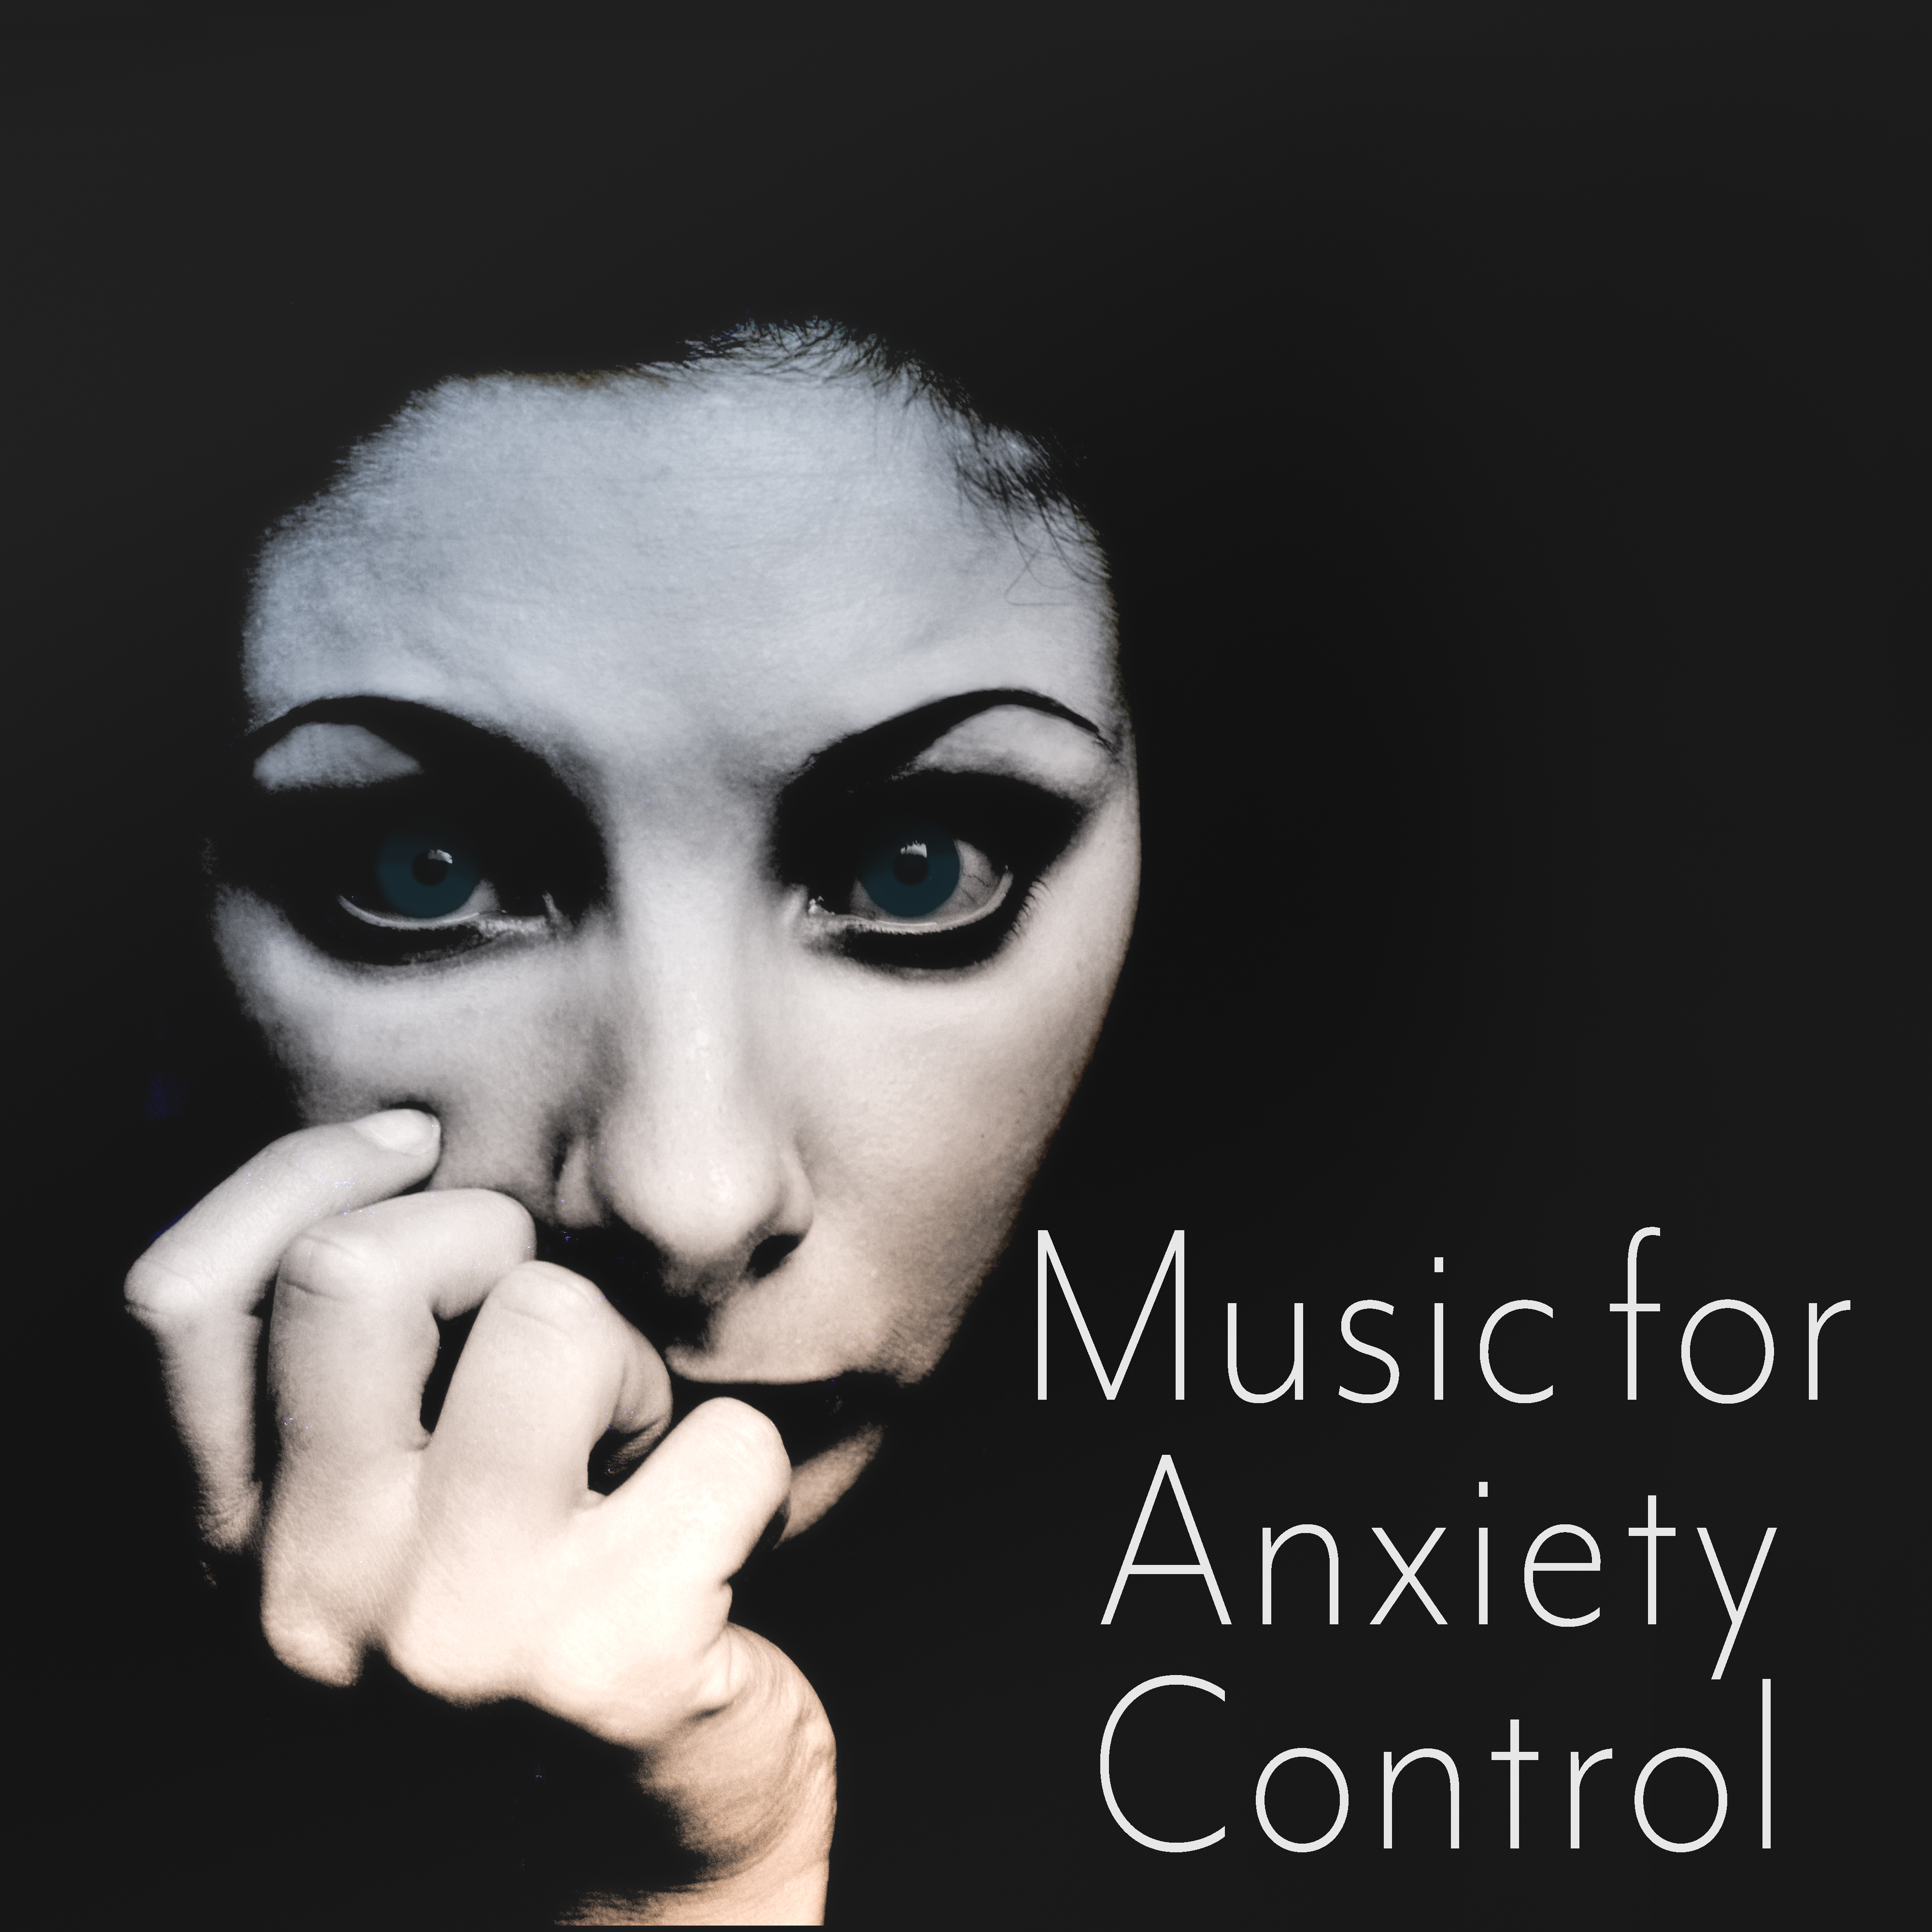 Music for Anxiety Control  Relaxing Music, Helpful for Meditation, Stress Less, Anxiety Control, Deep Meditation